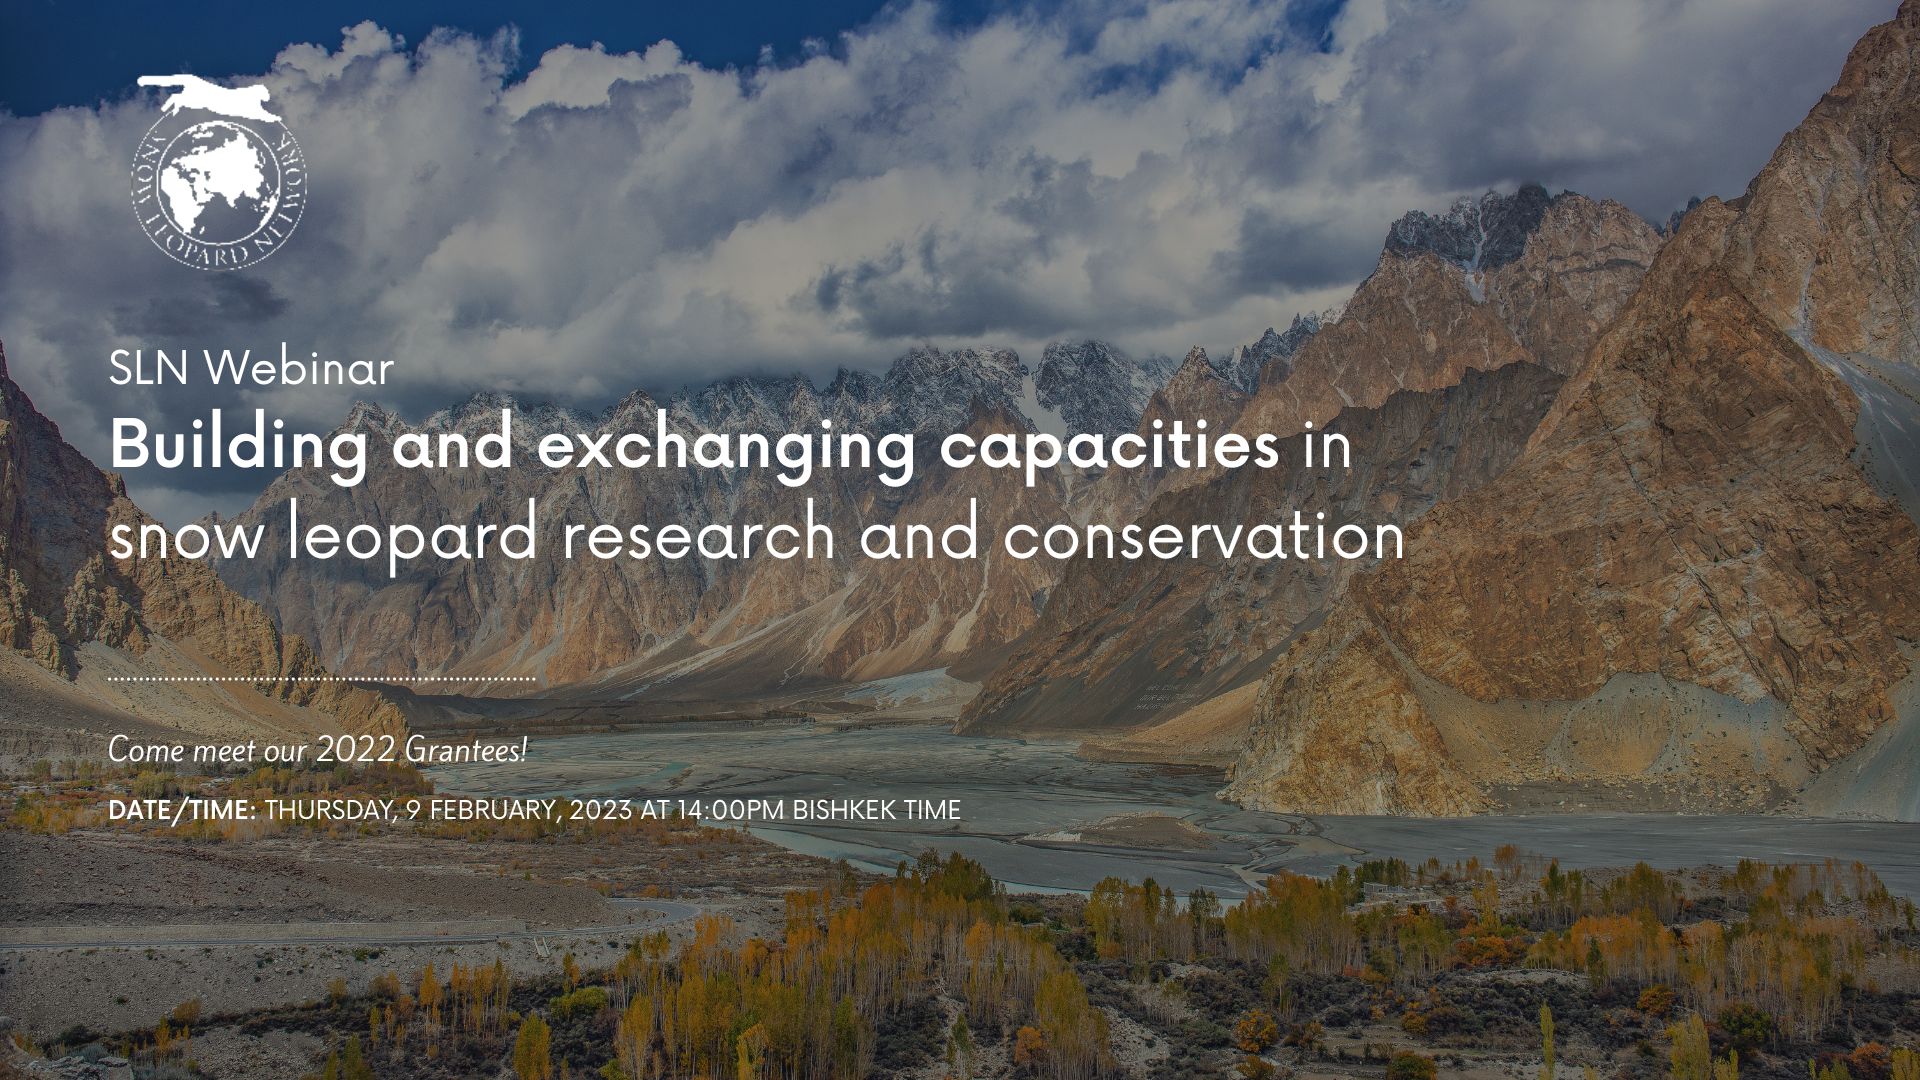 SLN Webinar: Building and exchanging capacities in snow leopard research and conservation